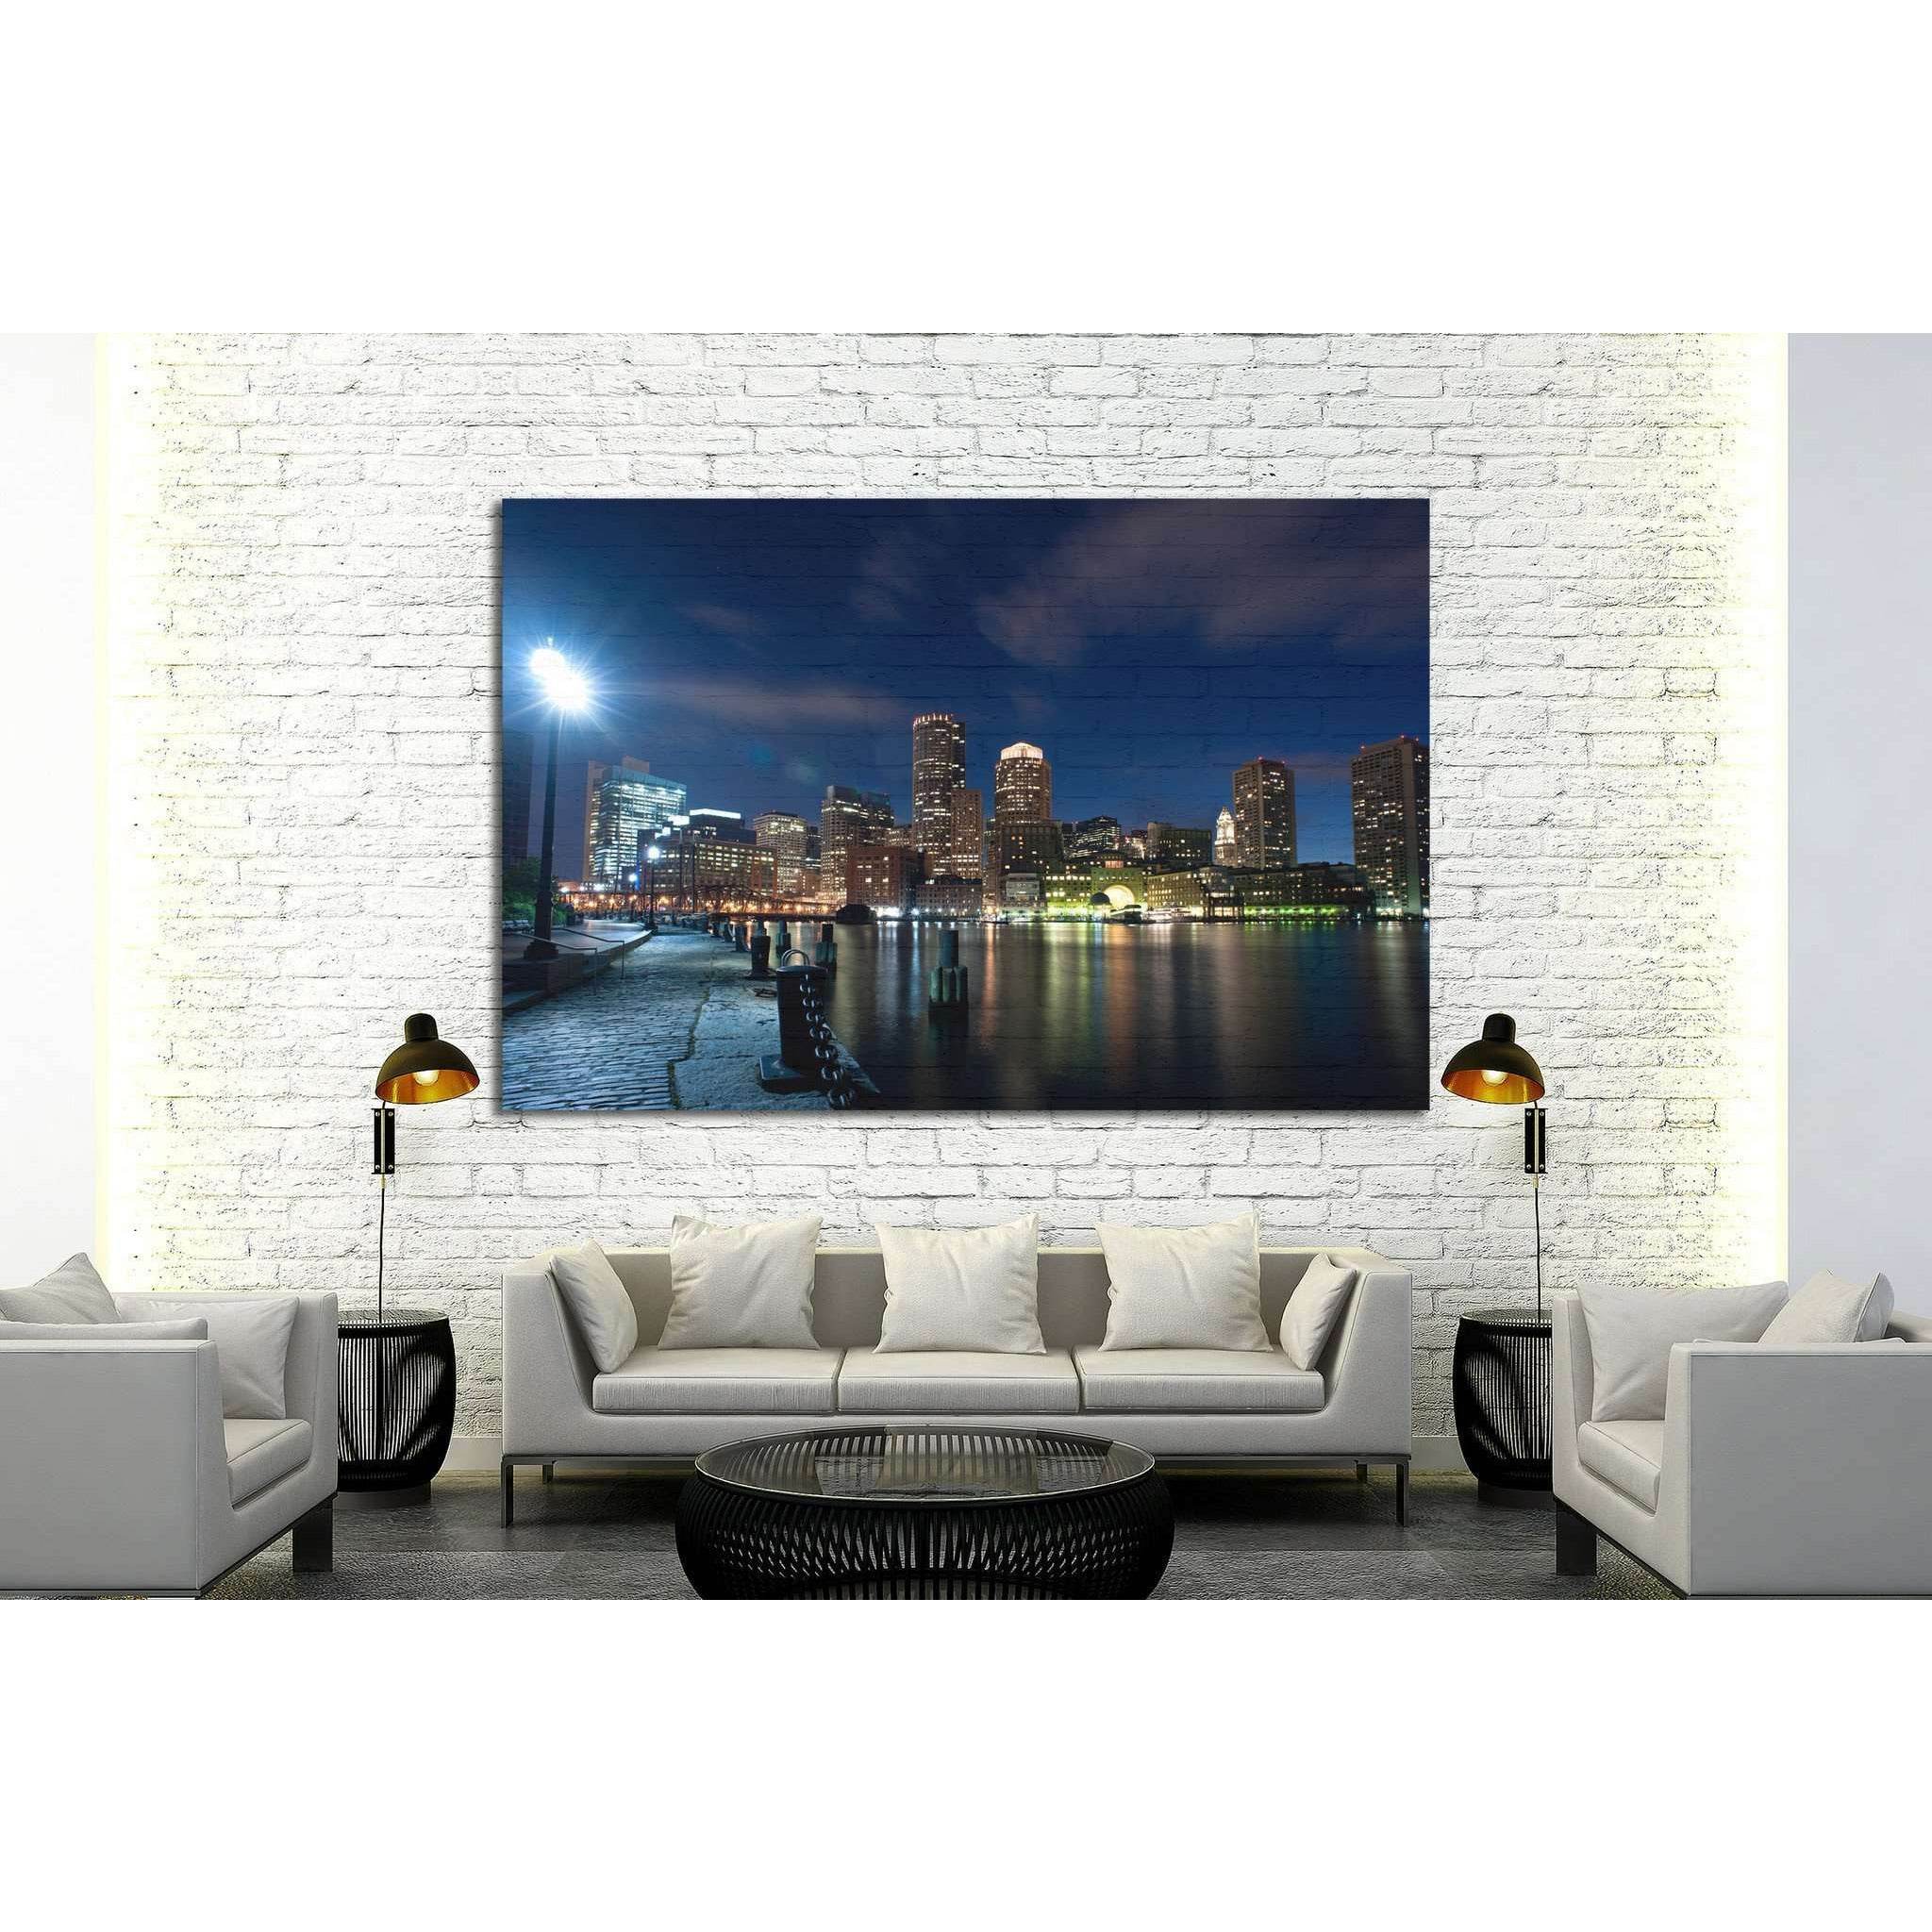 Boston's waterfront area at night №1140 Ready to Hang Canvas Print